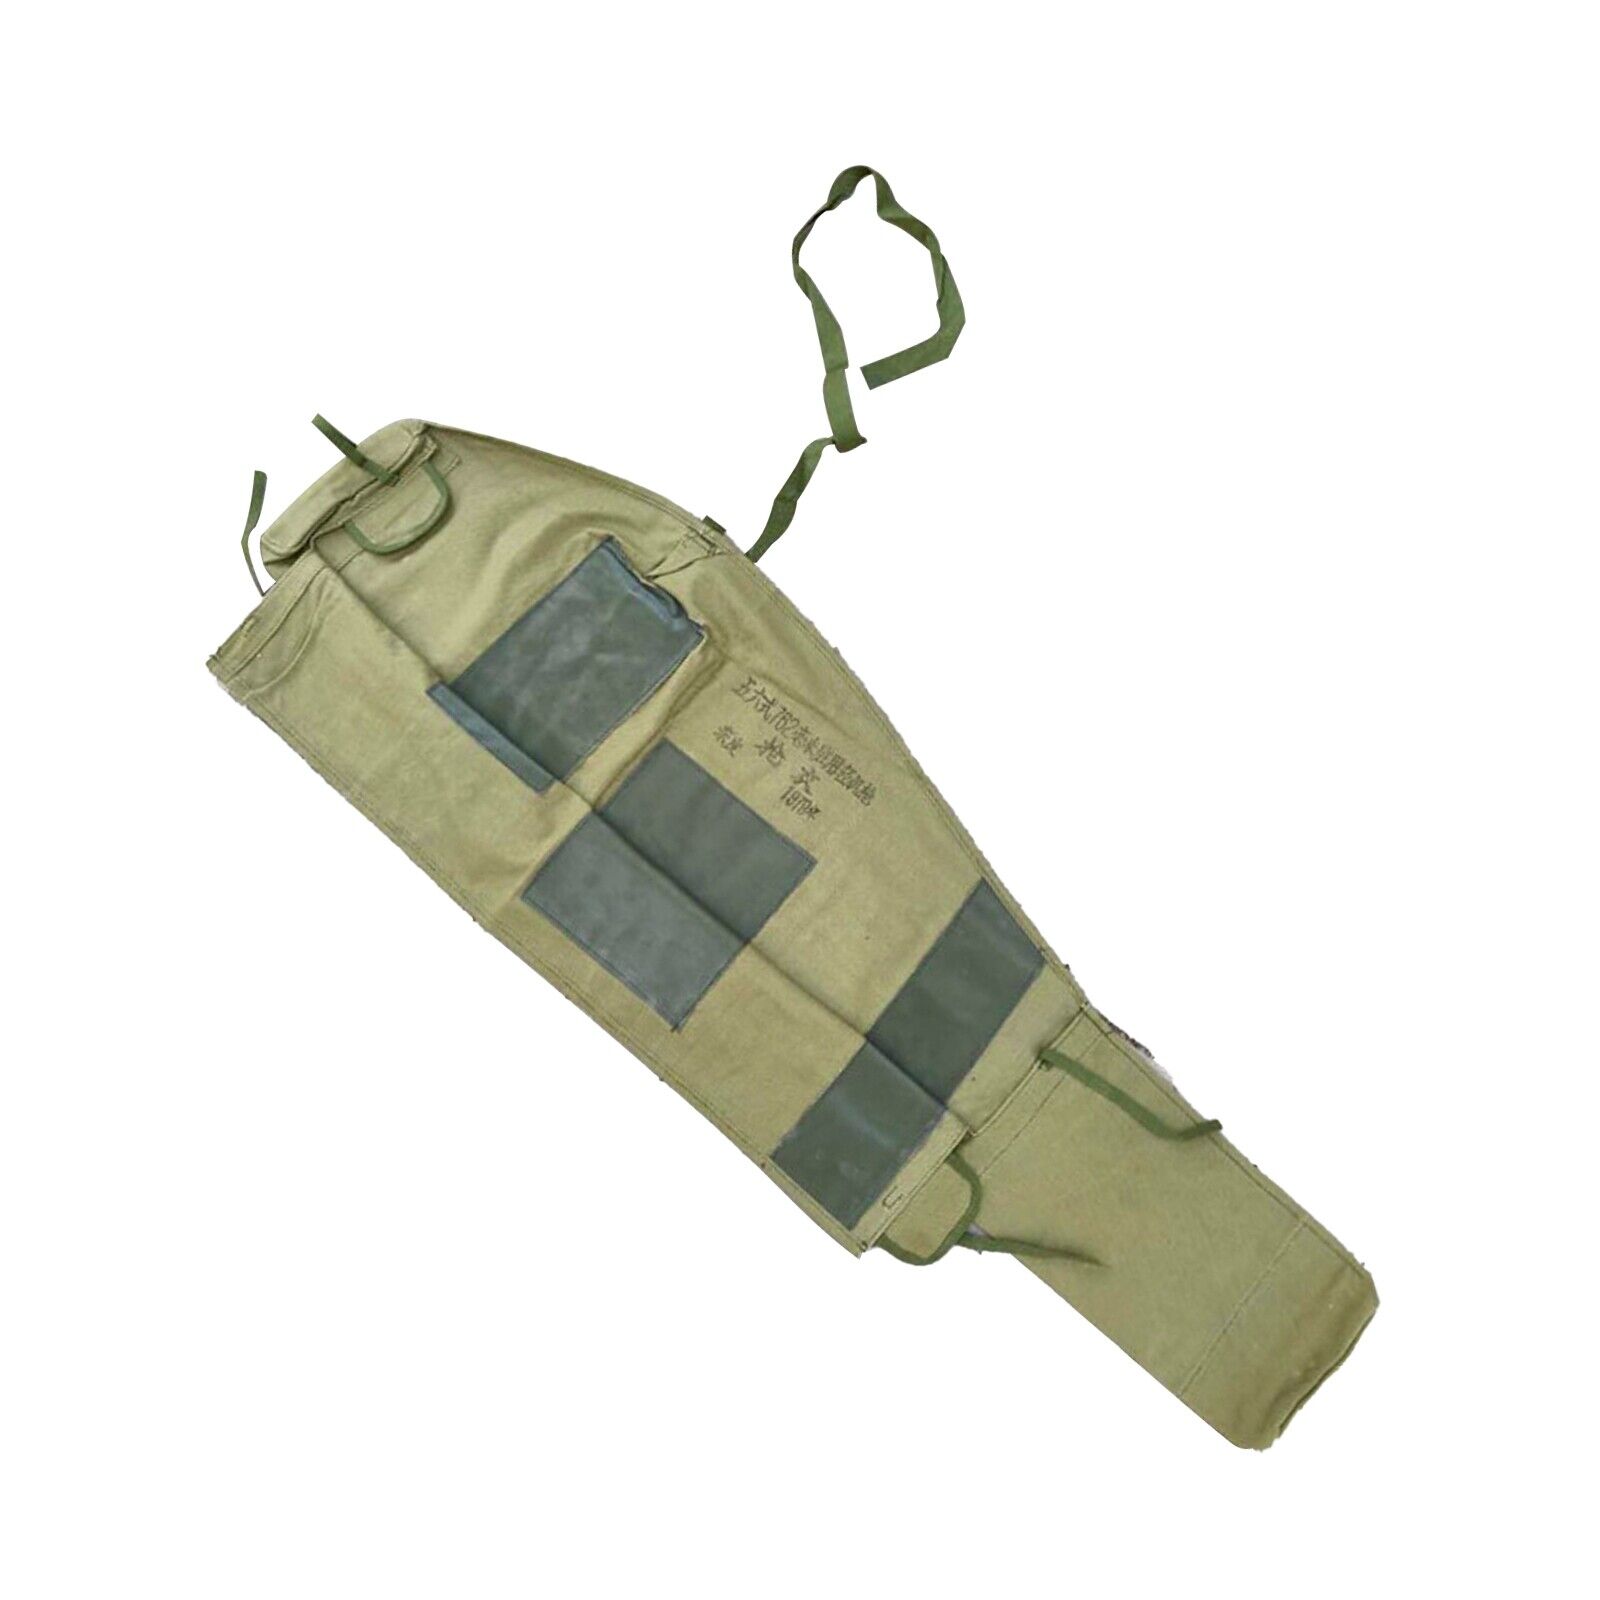 Scarce Special Original 7.62x39 rifle Chinese SKS Type 56 Canvas Case Cover Bag